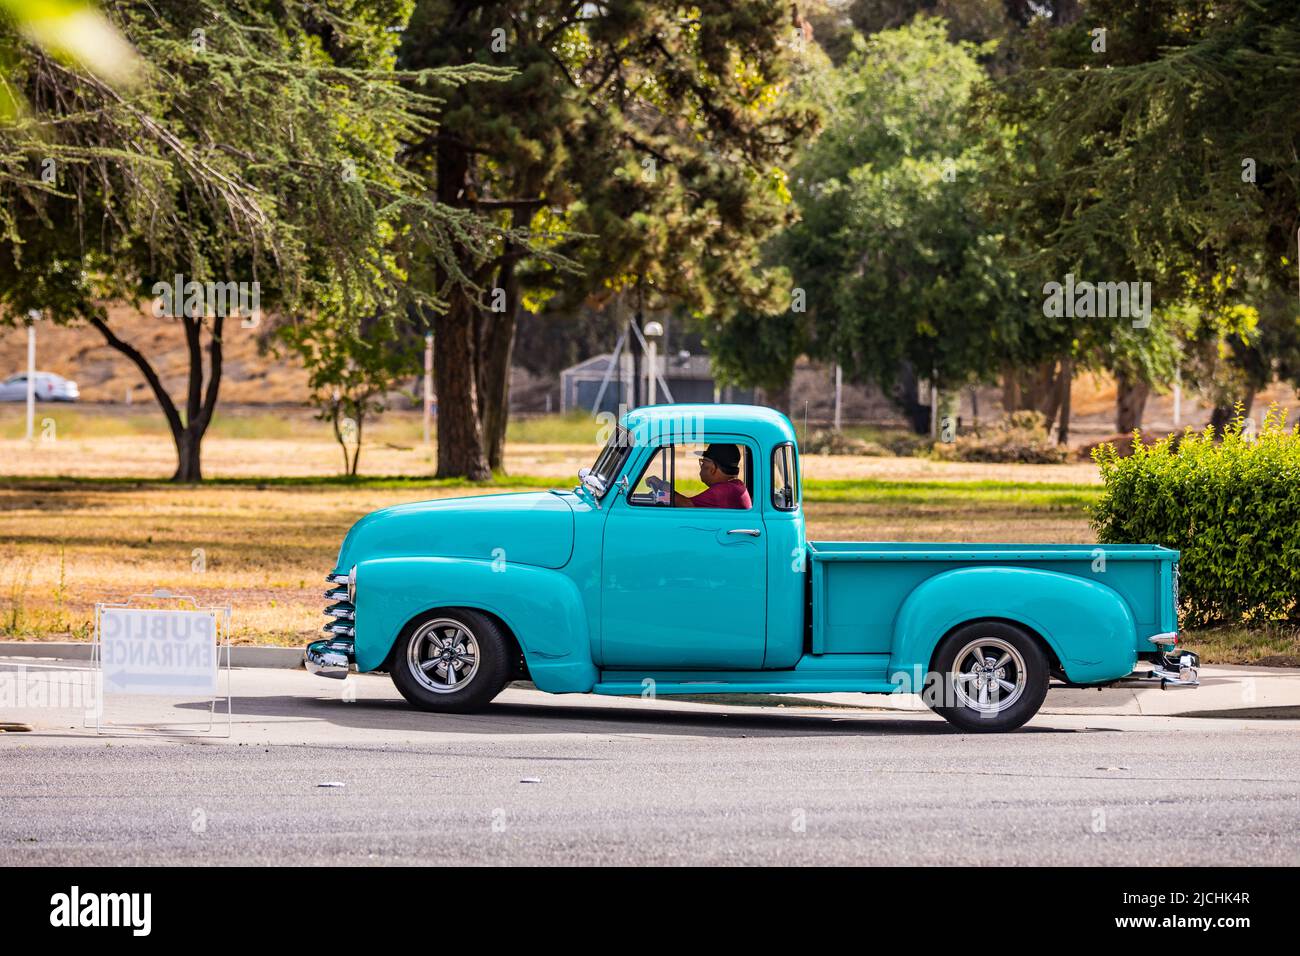 A 1952 Chevrolet pickup truck arrives at the American Graffiti charity Car Show at the Modesto Junior College campus June 11-12 2022 Stock Photo